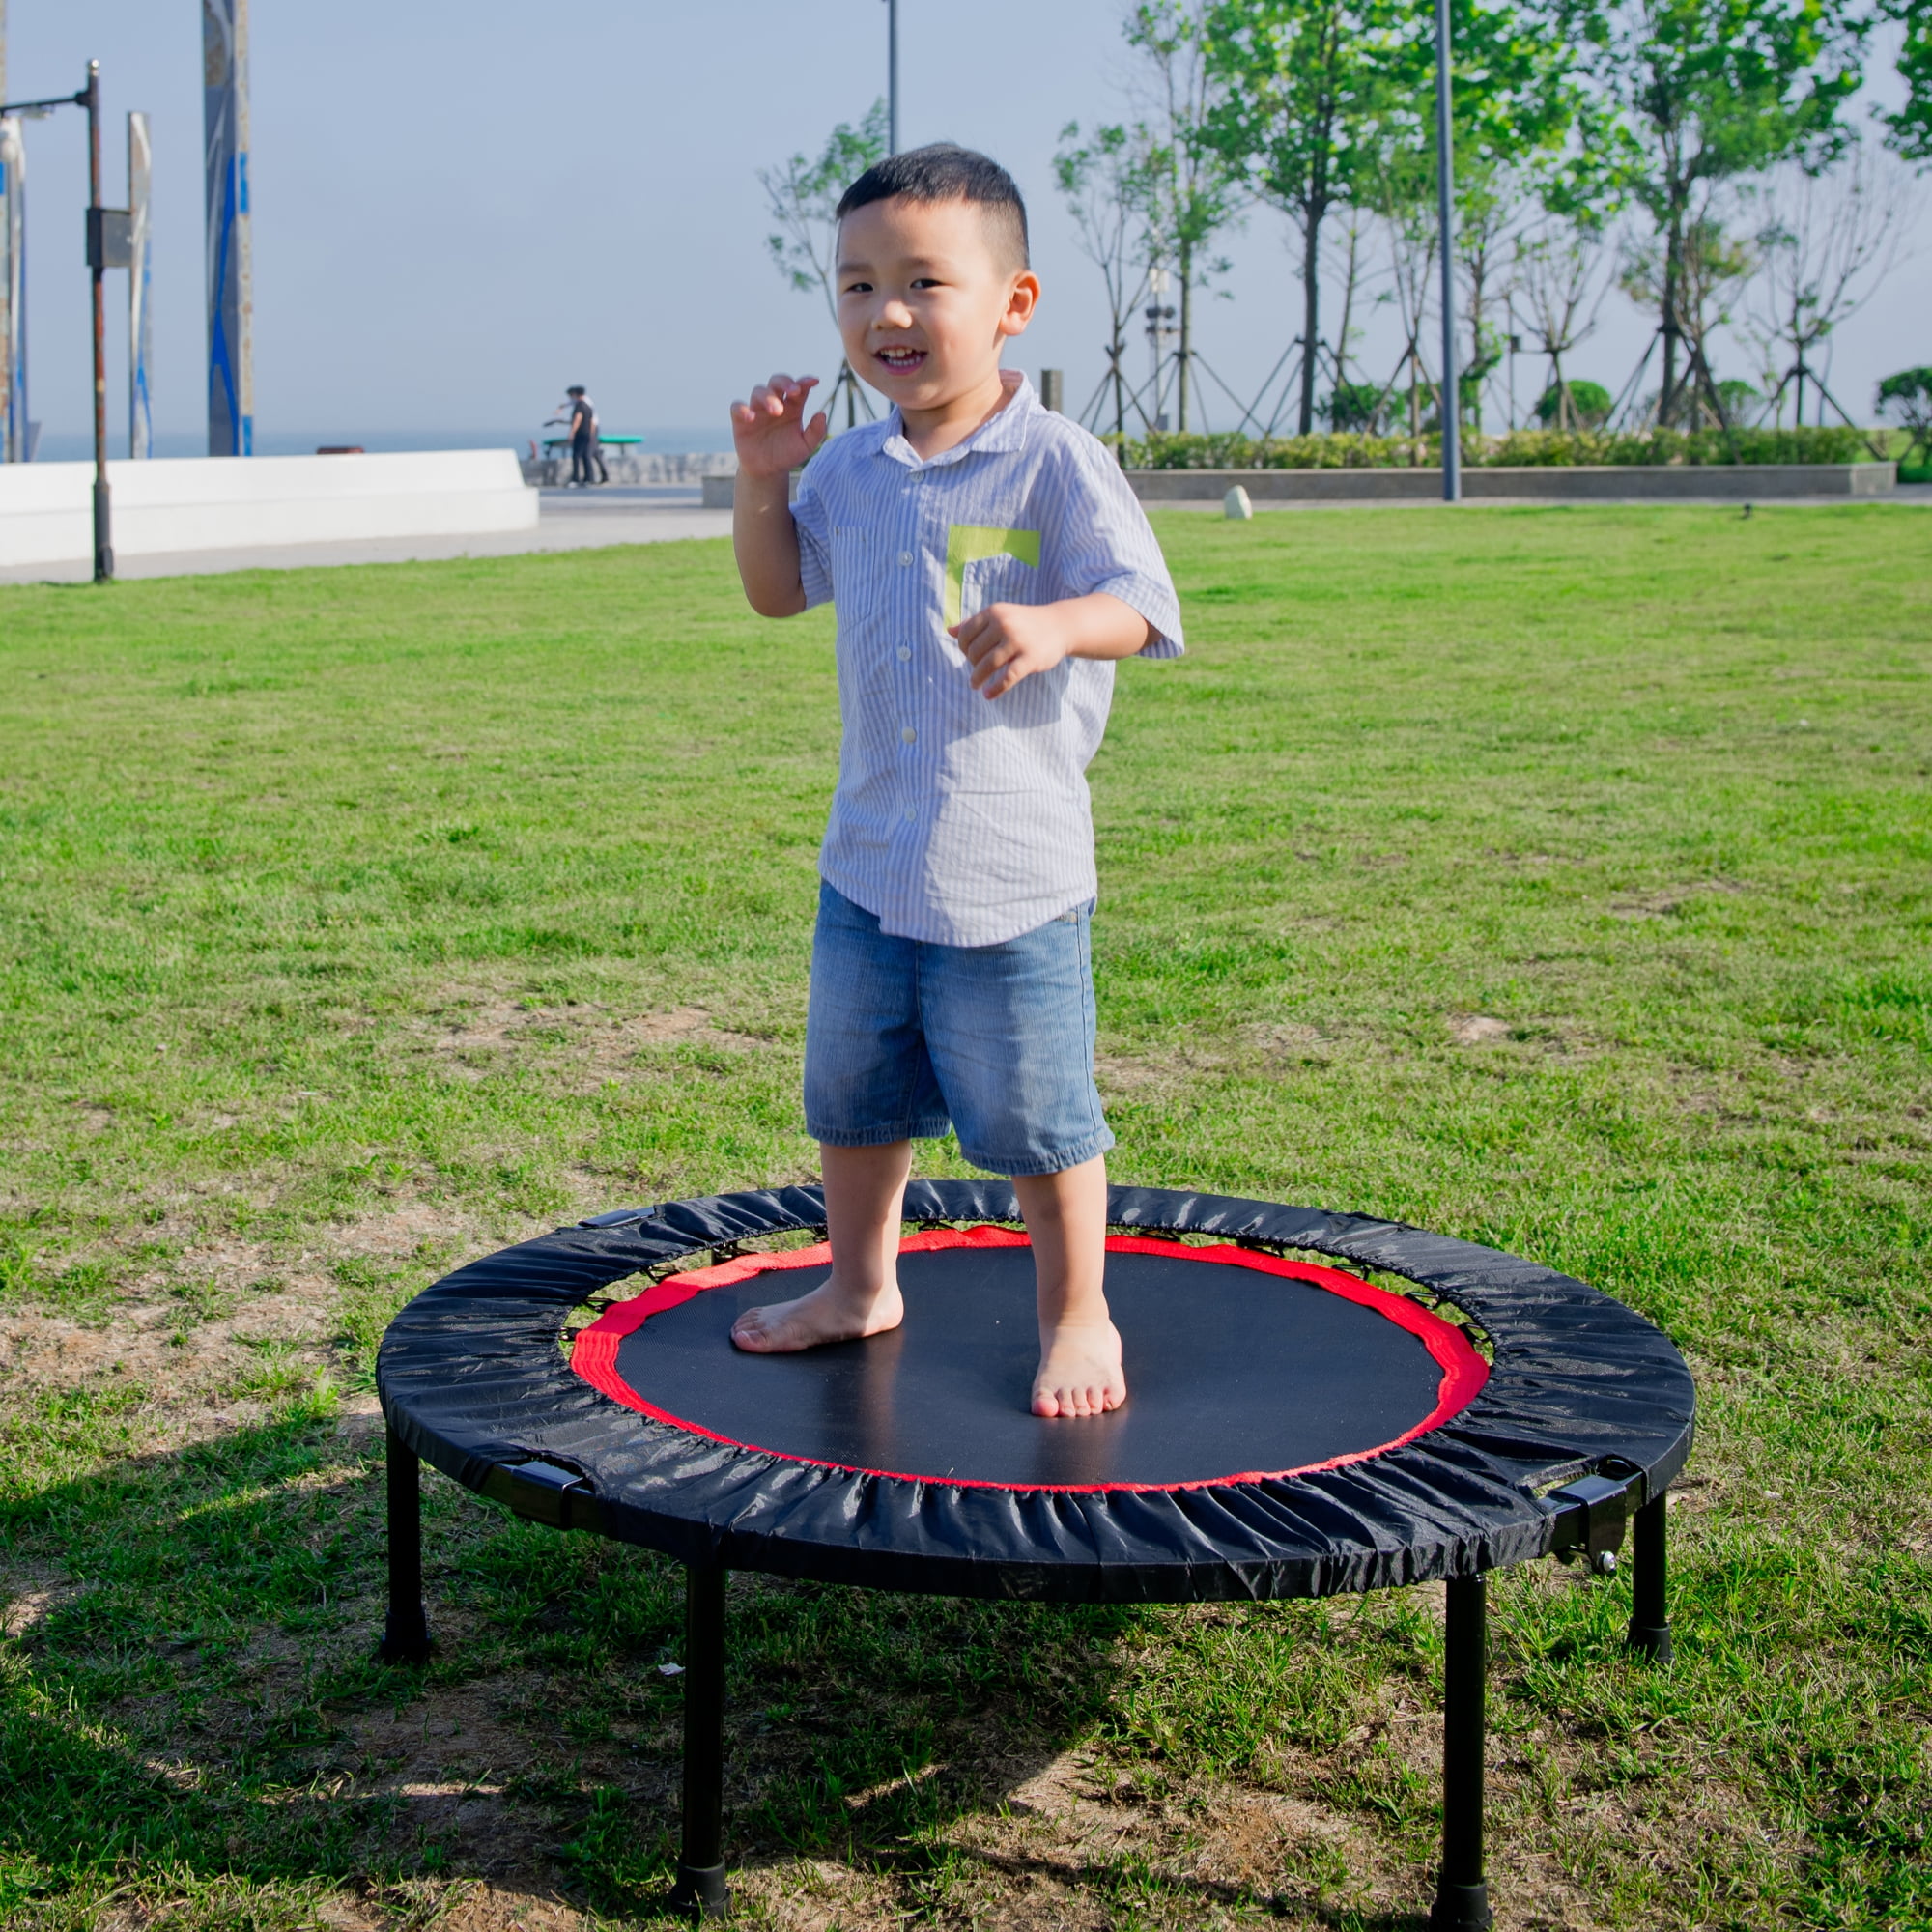 ZENOVA 40 Mini Trampoline for Adults and Kids Fitness, Indoor Trampoline  Rebounder with Adjustable Foam Handle for Bounce Workout Max Load 330lbs,  Blue and Black 